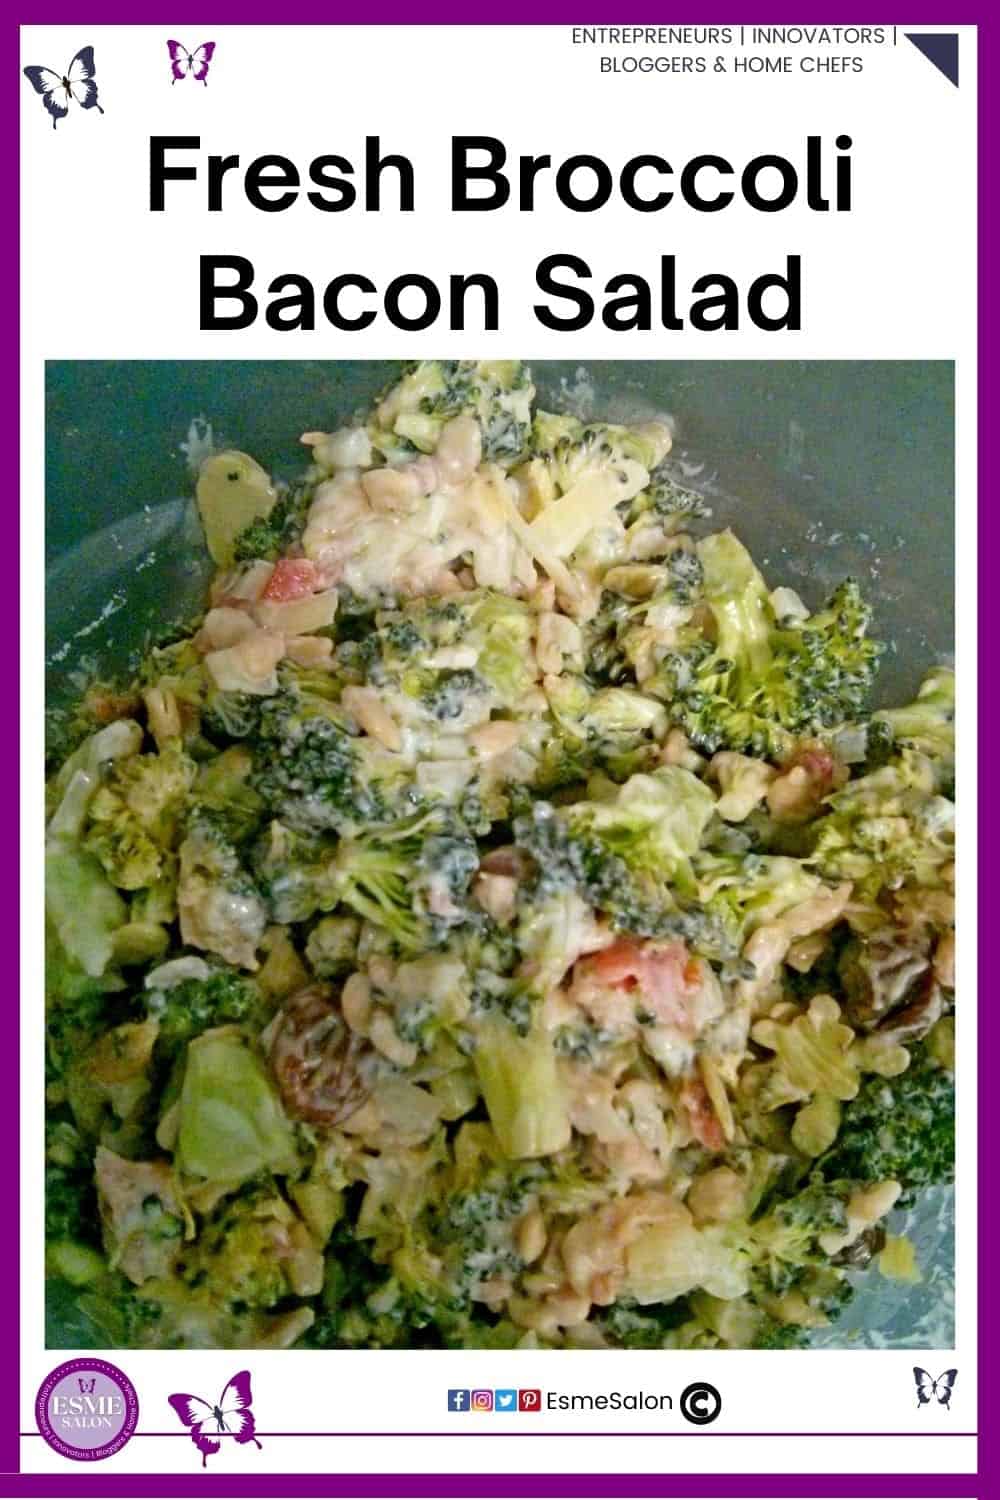 an image of a glass bowl filled with Fresh Green Broccoli and Bacon Salad with raisins and nuts